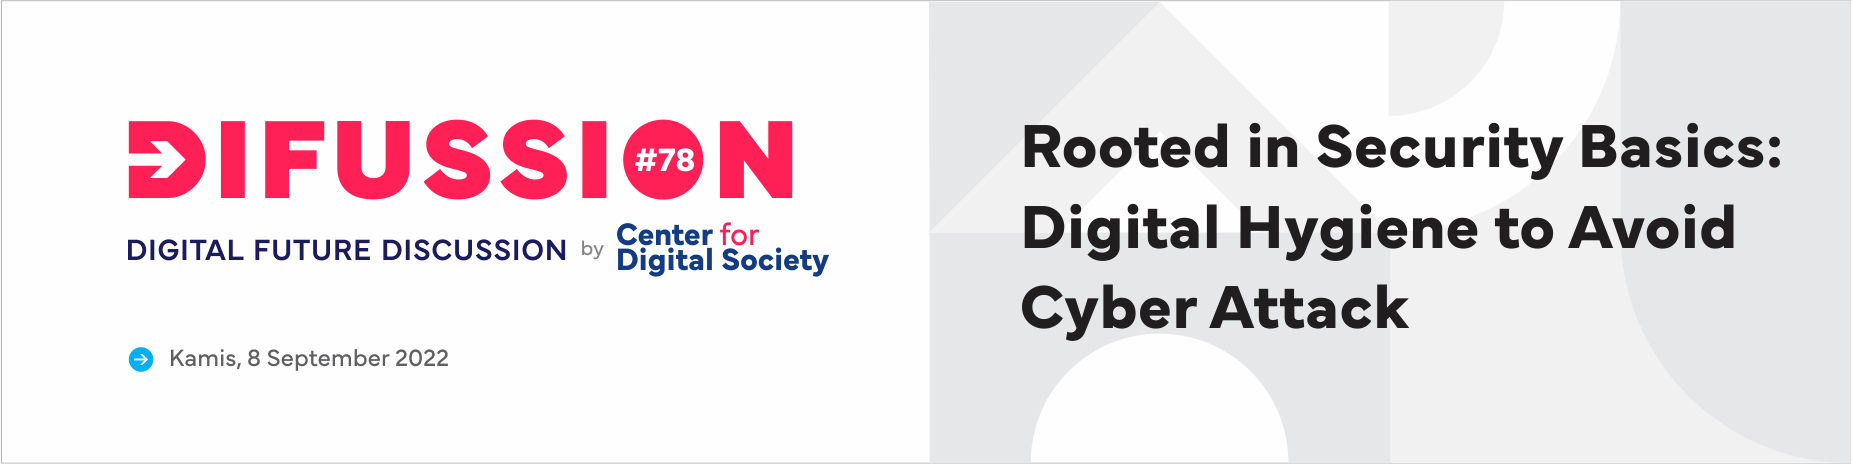 [PRESS RELEASE] Rooted in Security Basics: Digital hygiene to Avoid Cyber Attack | #Difussion78